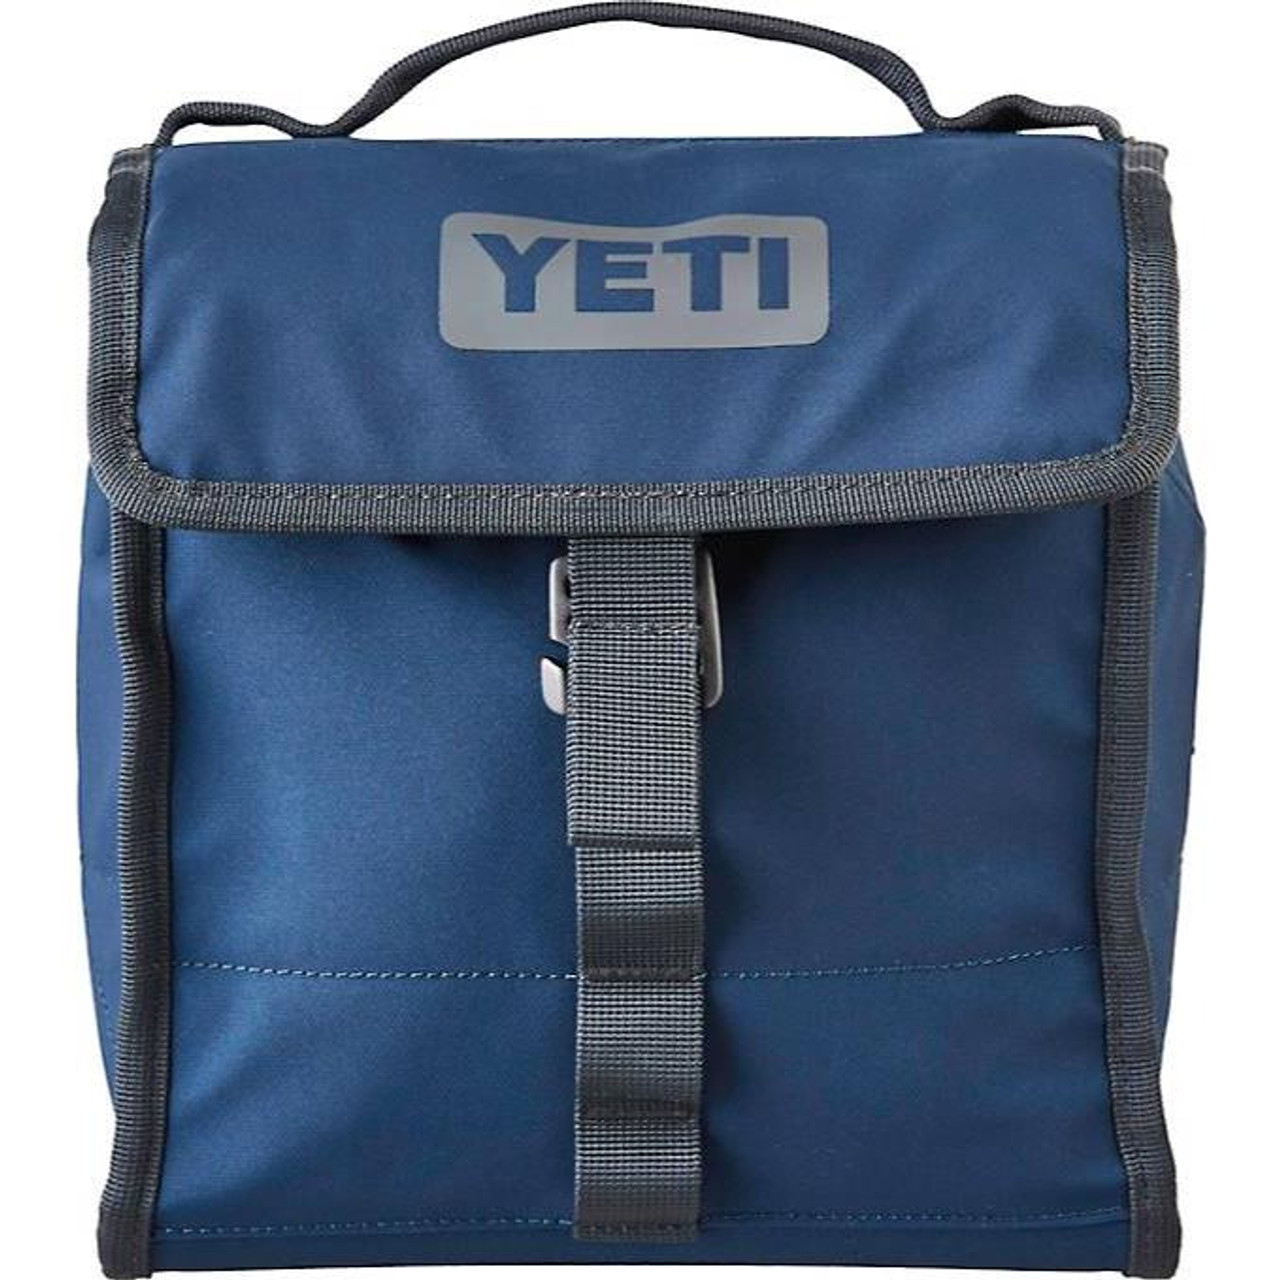 https://cdn11.bigcommerce.com/s-70mih4s/images/stencil/1280x1280/products/17089/43017/Yeti-Daytrip-Lunch-Bag-888830050576_image1__15828.1568778471.jpg?c=2